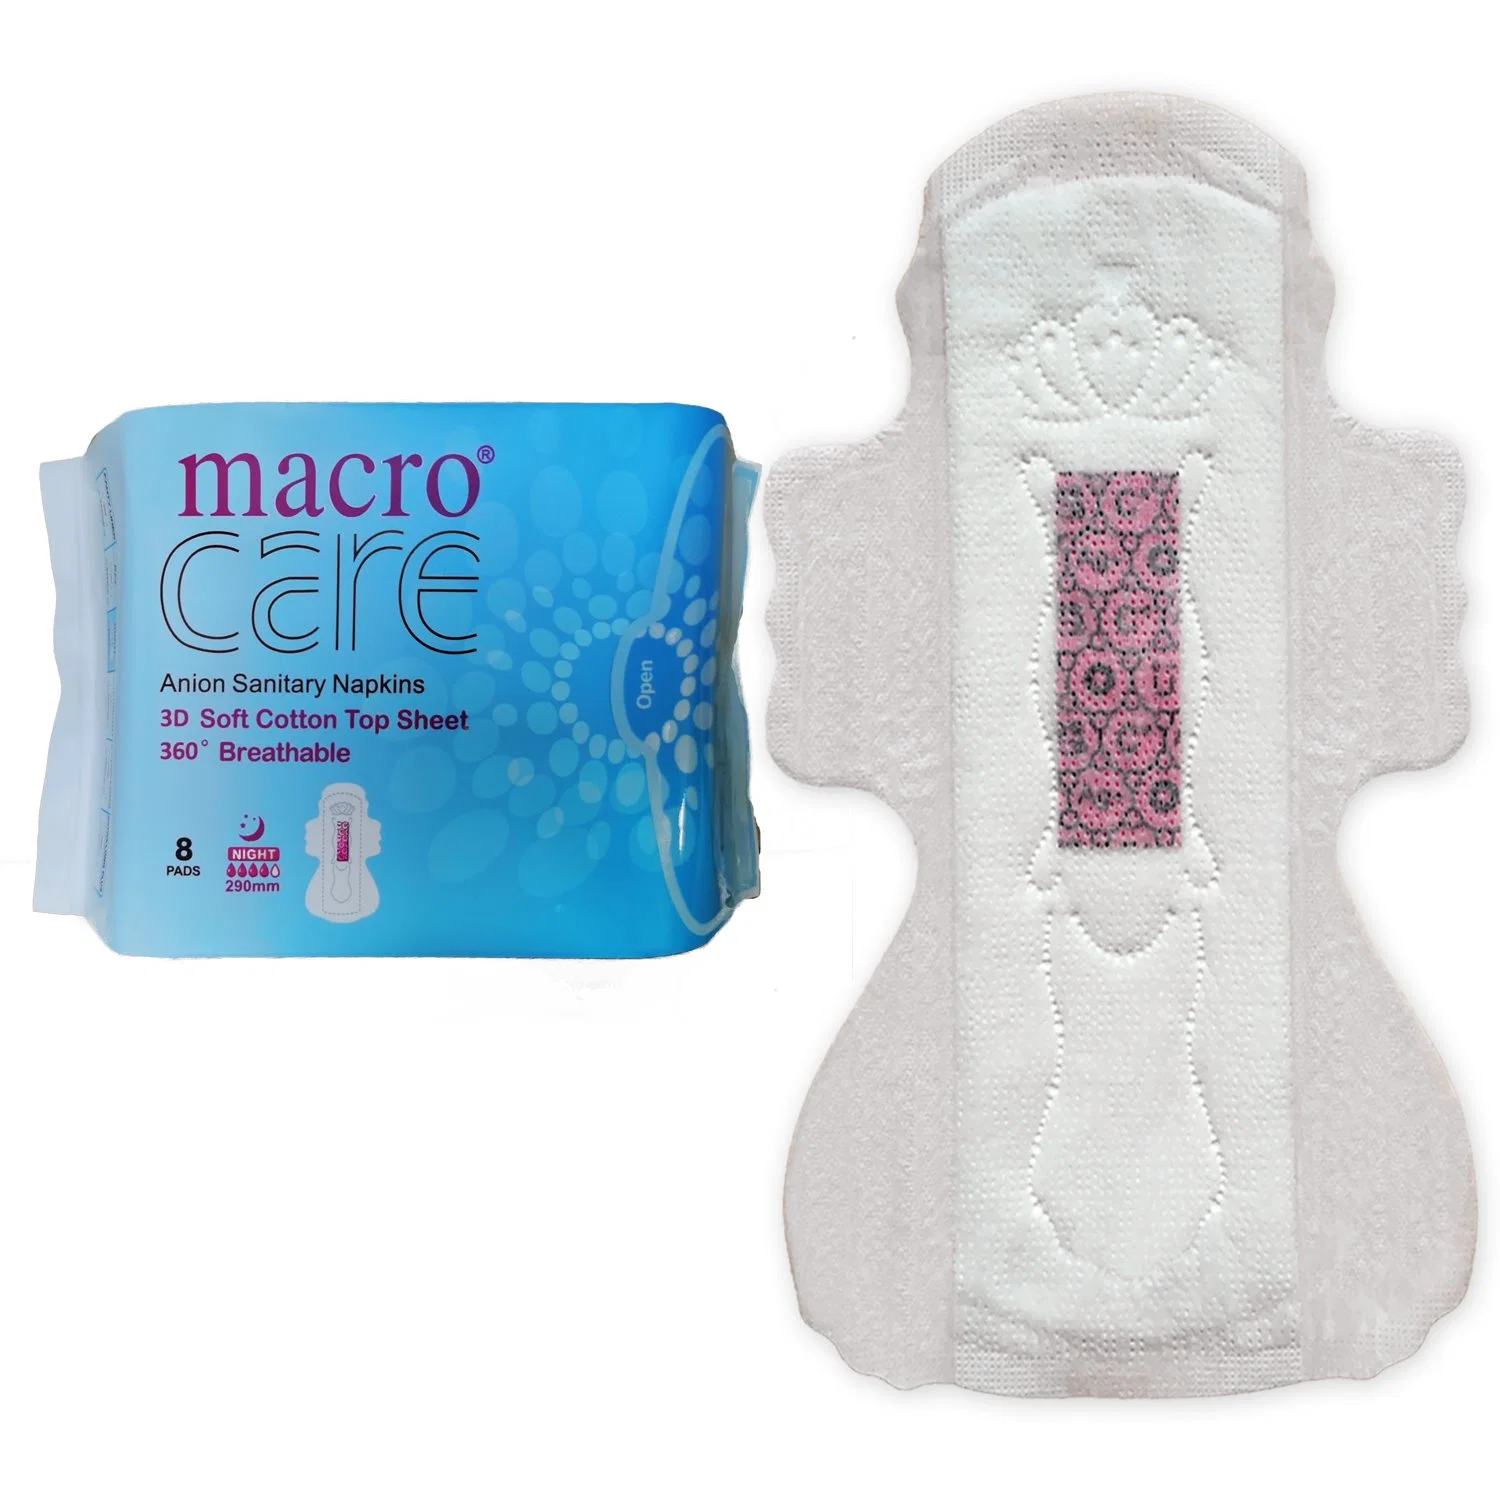 Winged Super Absorbent Macrocare Inner Packing: Polybag; Outer Carton Baby Pant Diaper Sanitary Pads